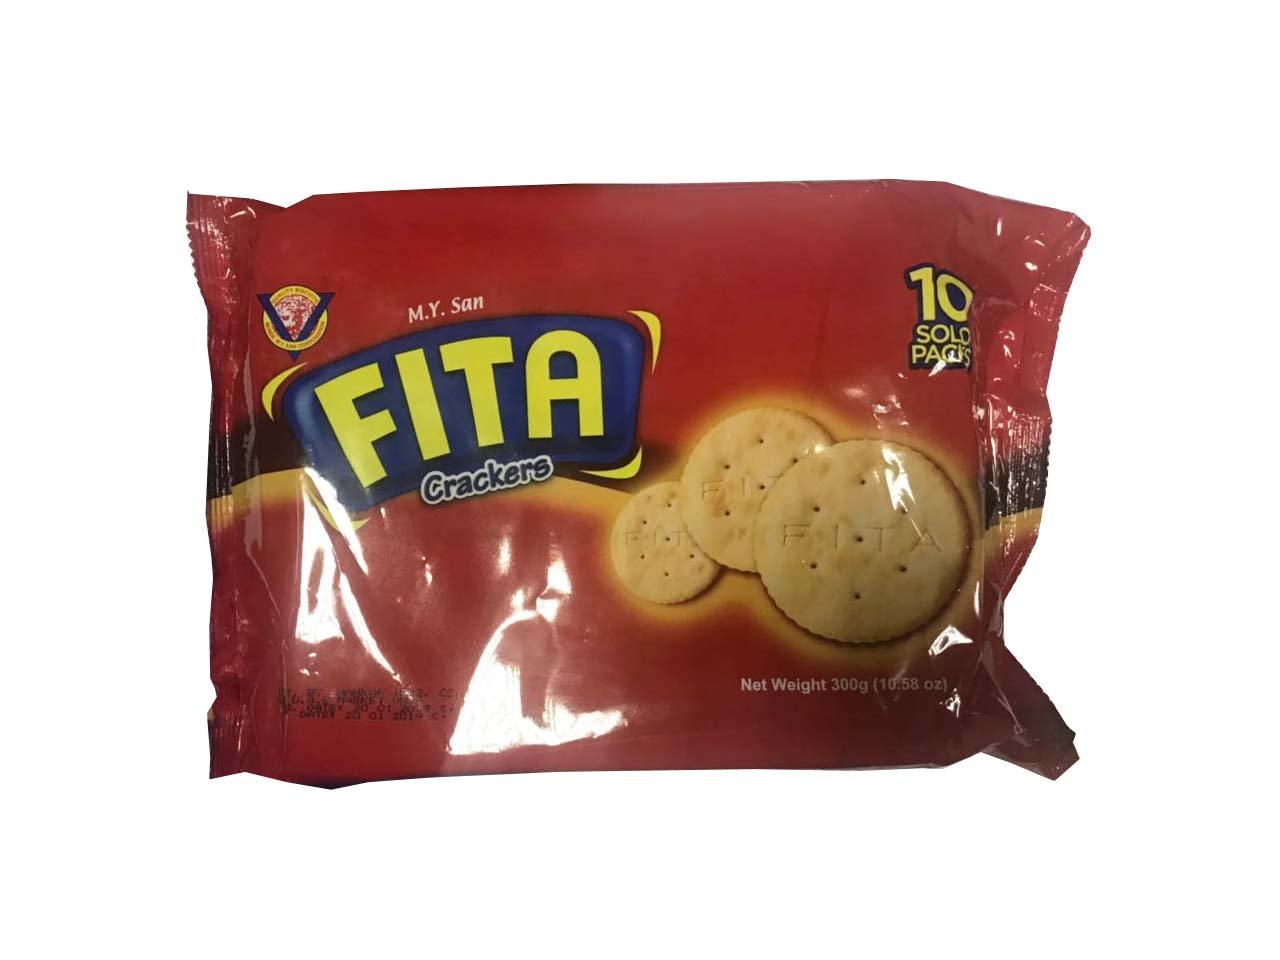 M.Y. Fita Crackers 10 Solo Packs 300g